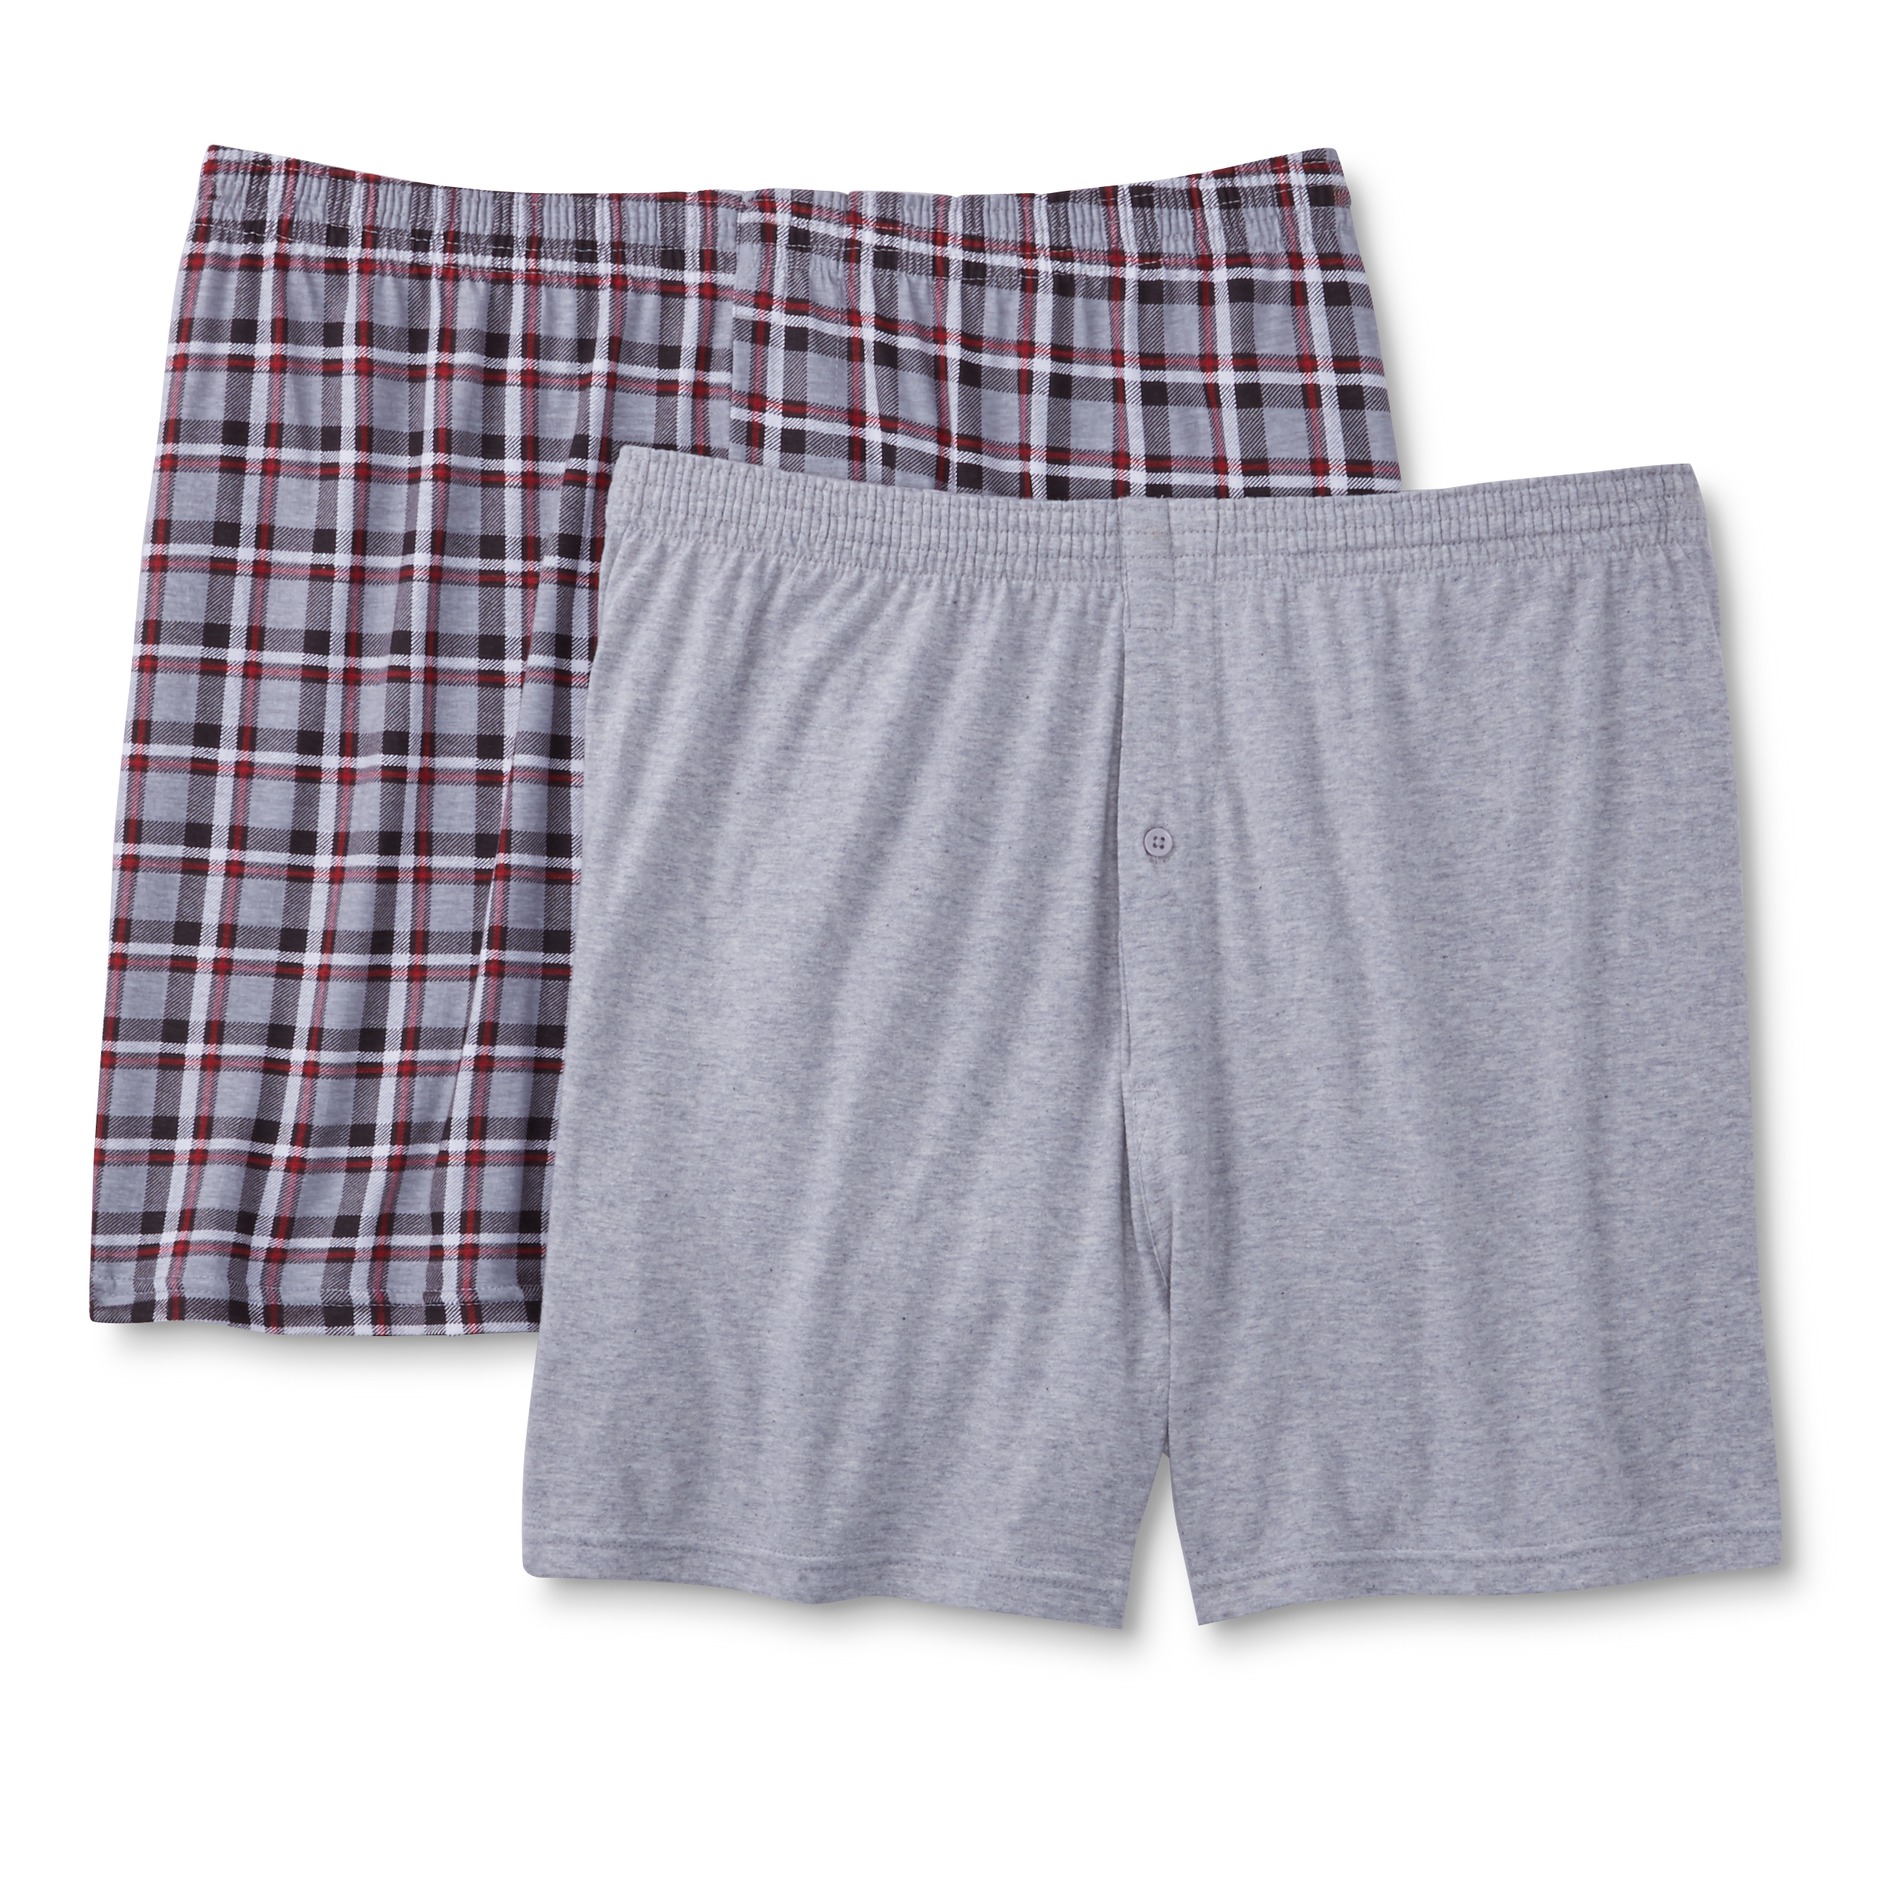 Simply Styled Men's 2-Pack Knit Boxer Shorts